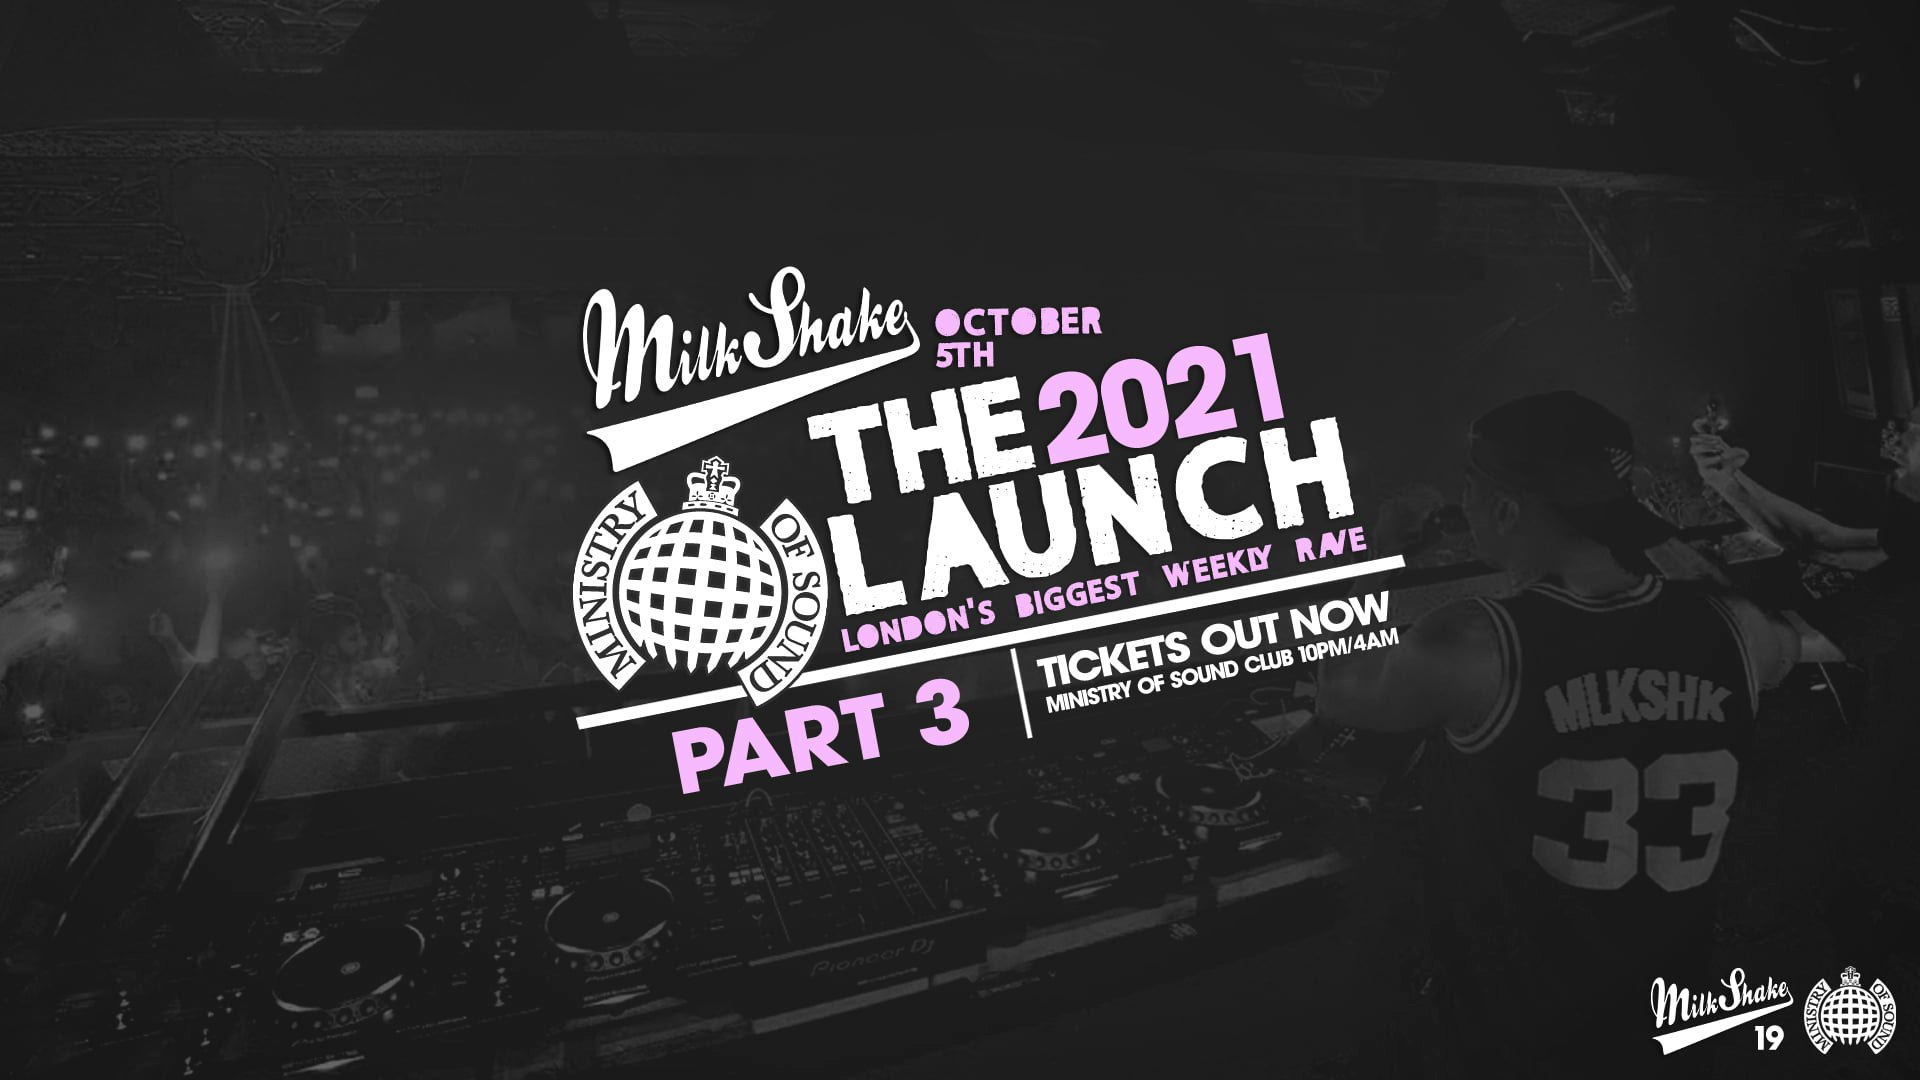 Ministry of Sound, Milkshake – The Official Freshers Launch PART 3 🔥 Ft SPECIAL DJ GUEST 👀